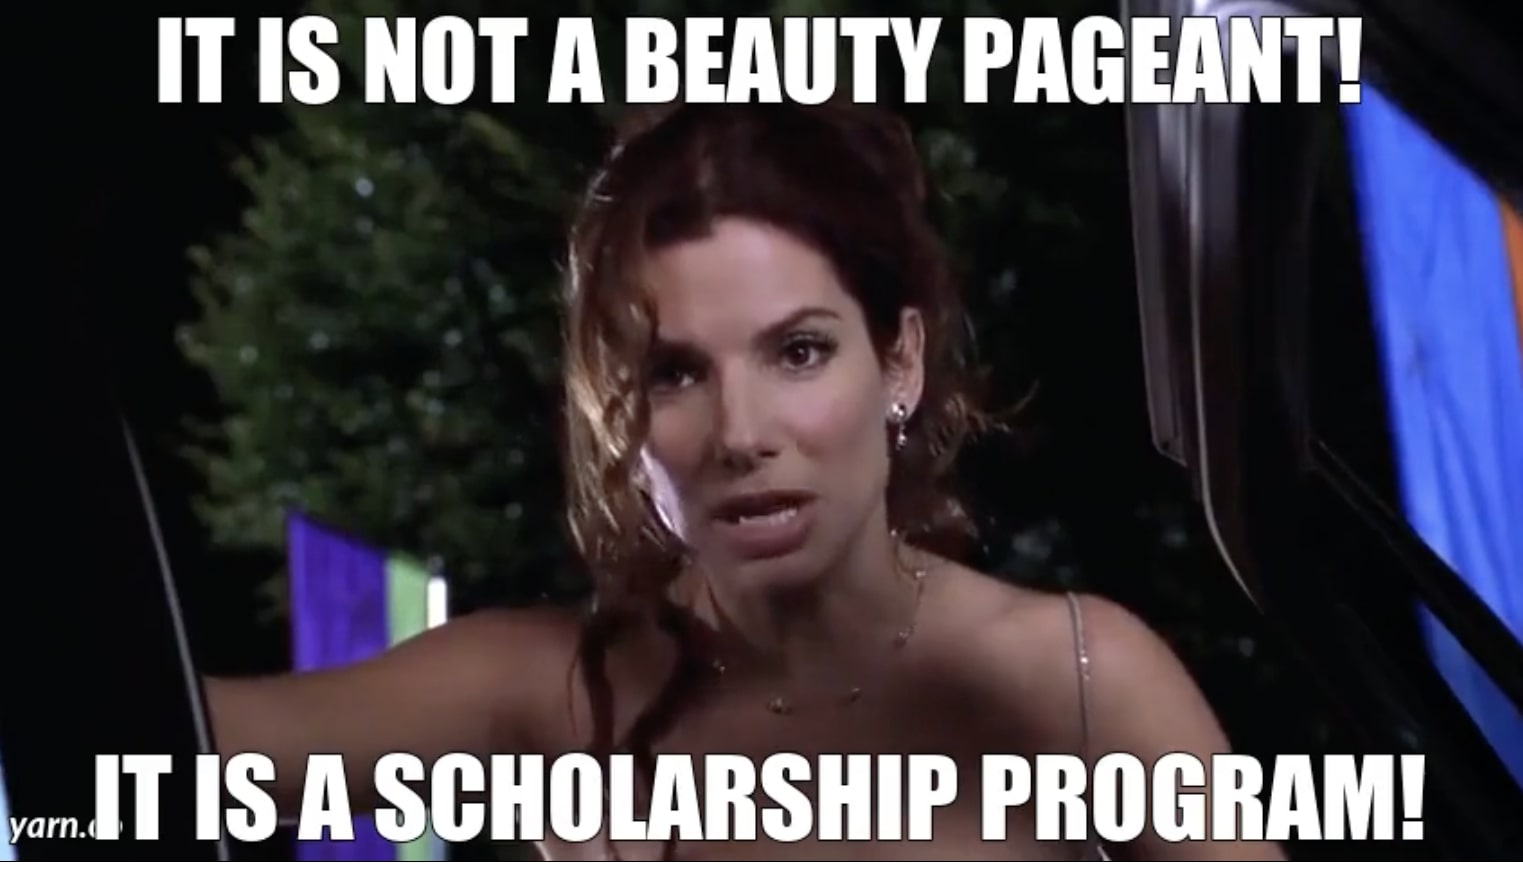 Sandra Bullock’s iconic Miss Congeniality line “It’s not a beauty pageant! It’s a scholarship competition!!”